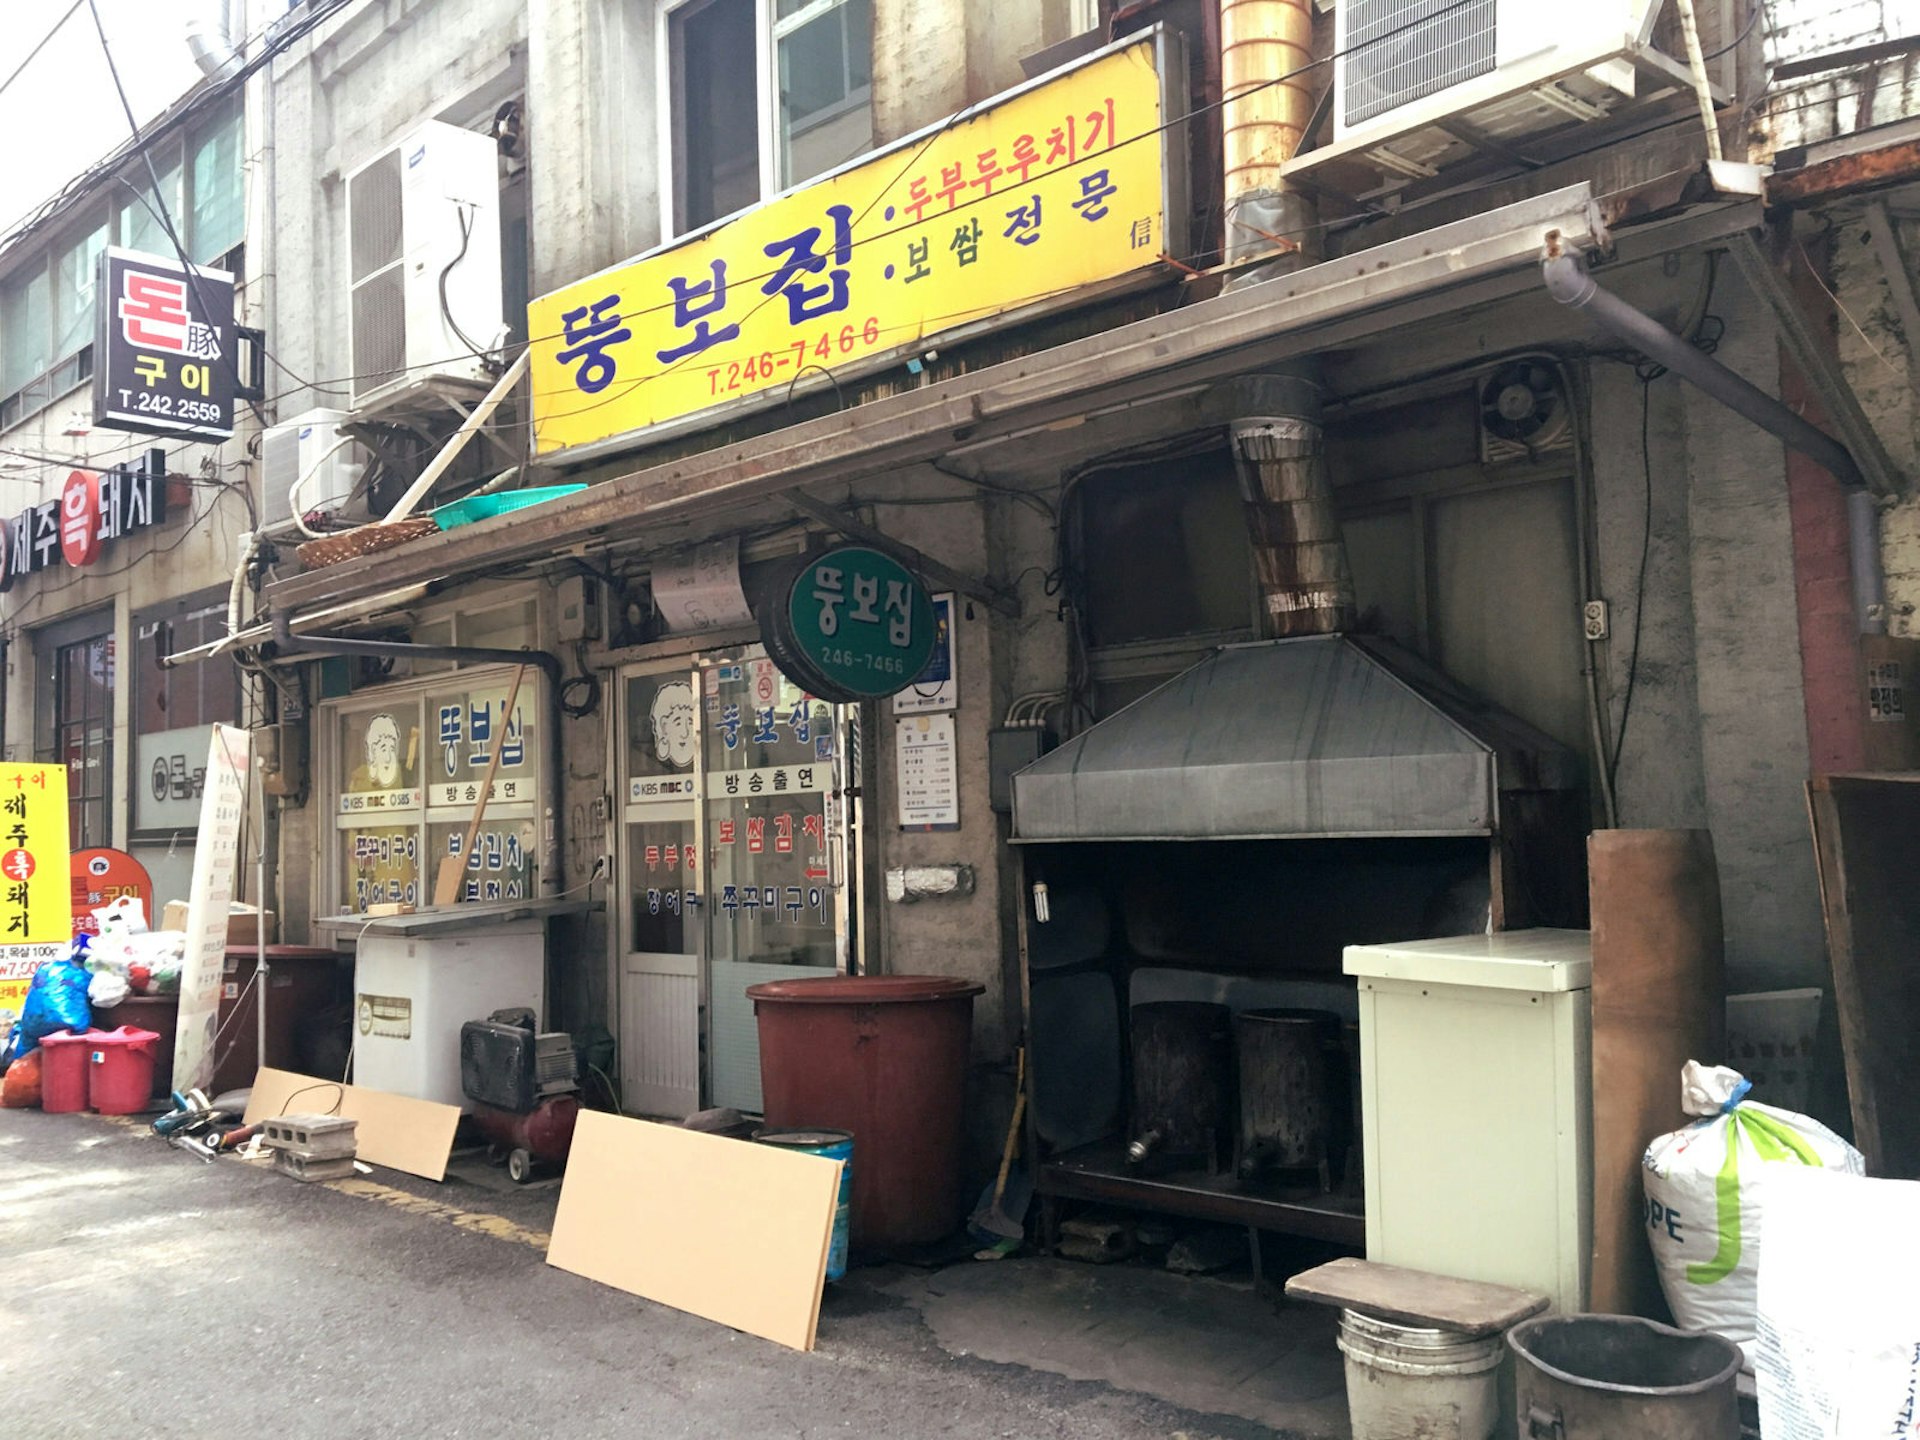 A yellow sign in Korean marks the entrance to Ddoongbo Jip, where a large metal coal-fire grill sits beside the glass doors © Hahna Yoon / Lonely Planet